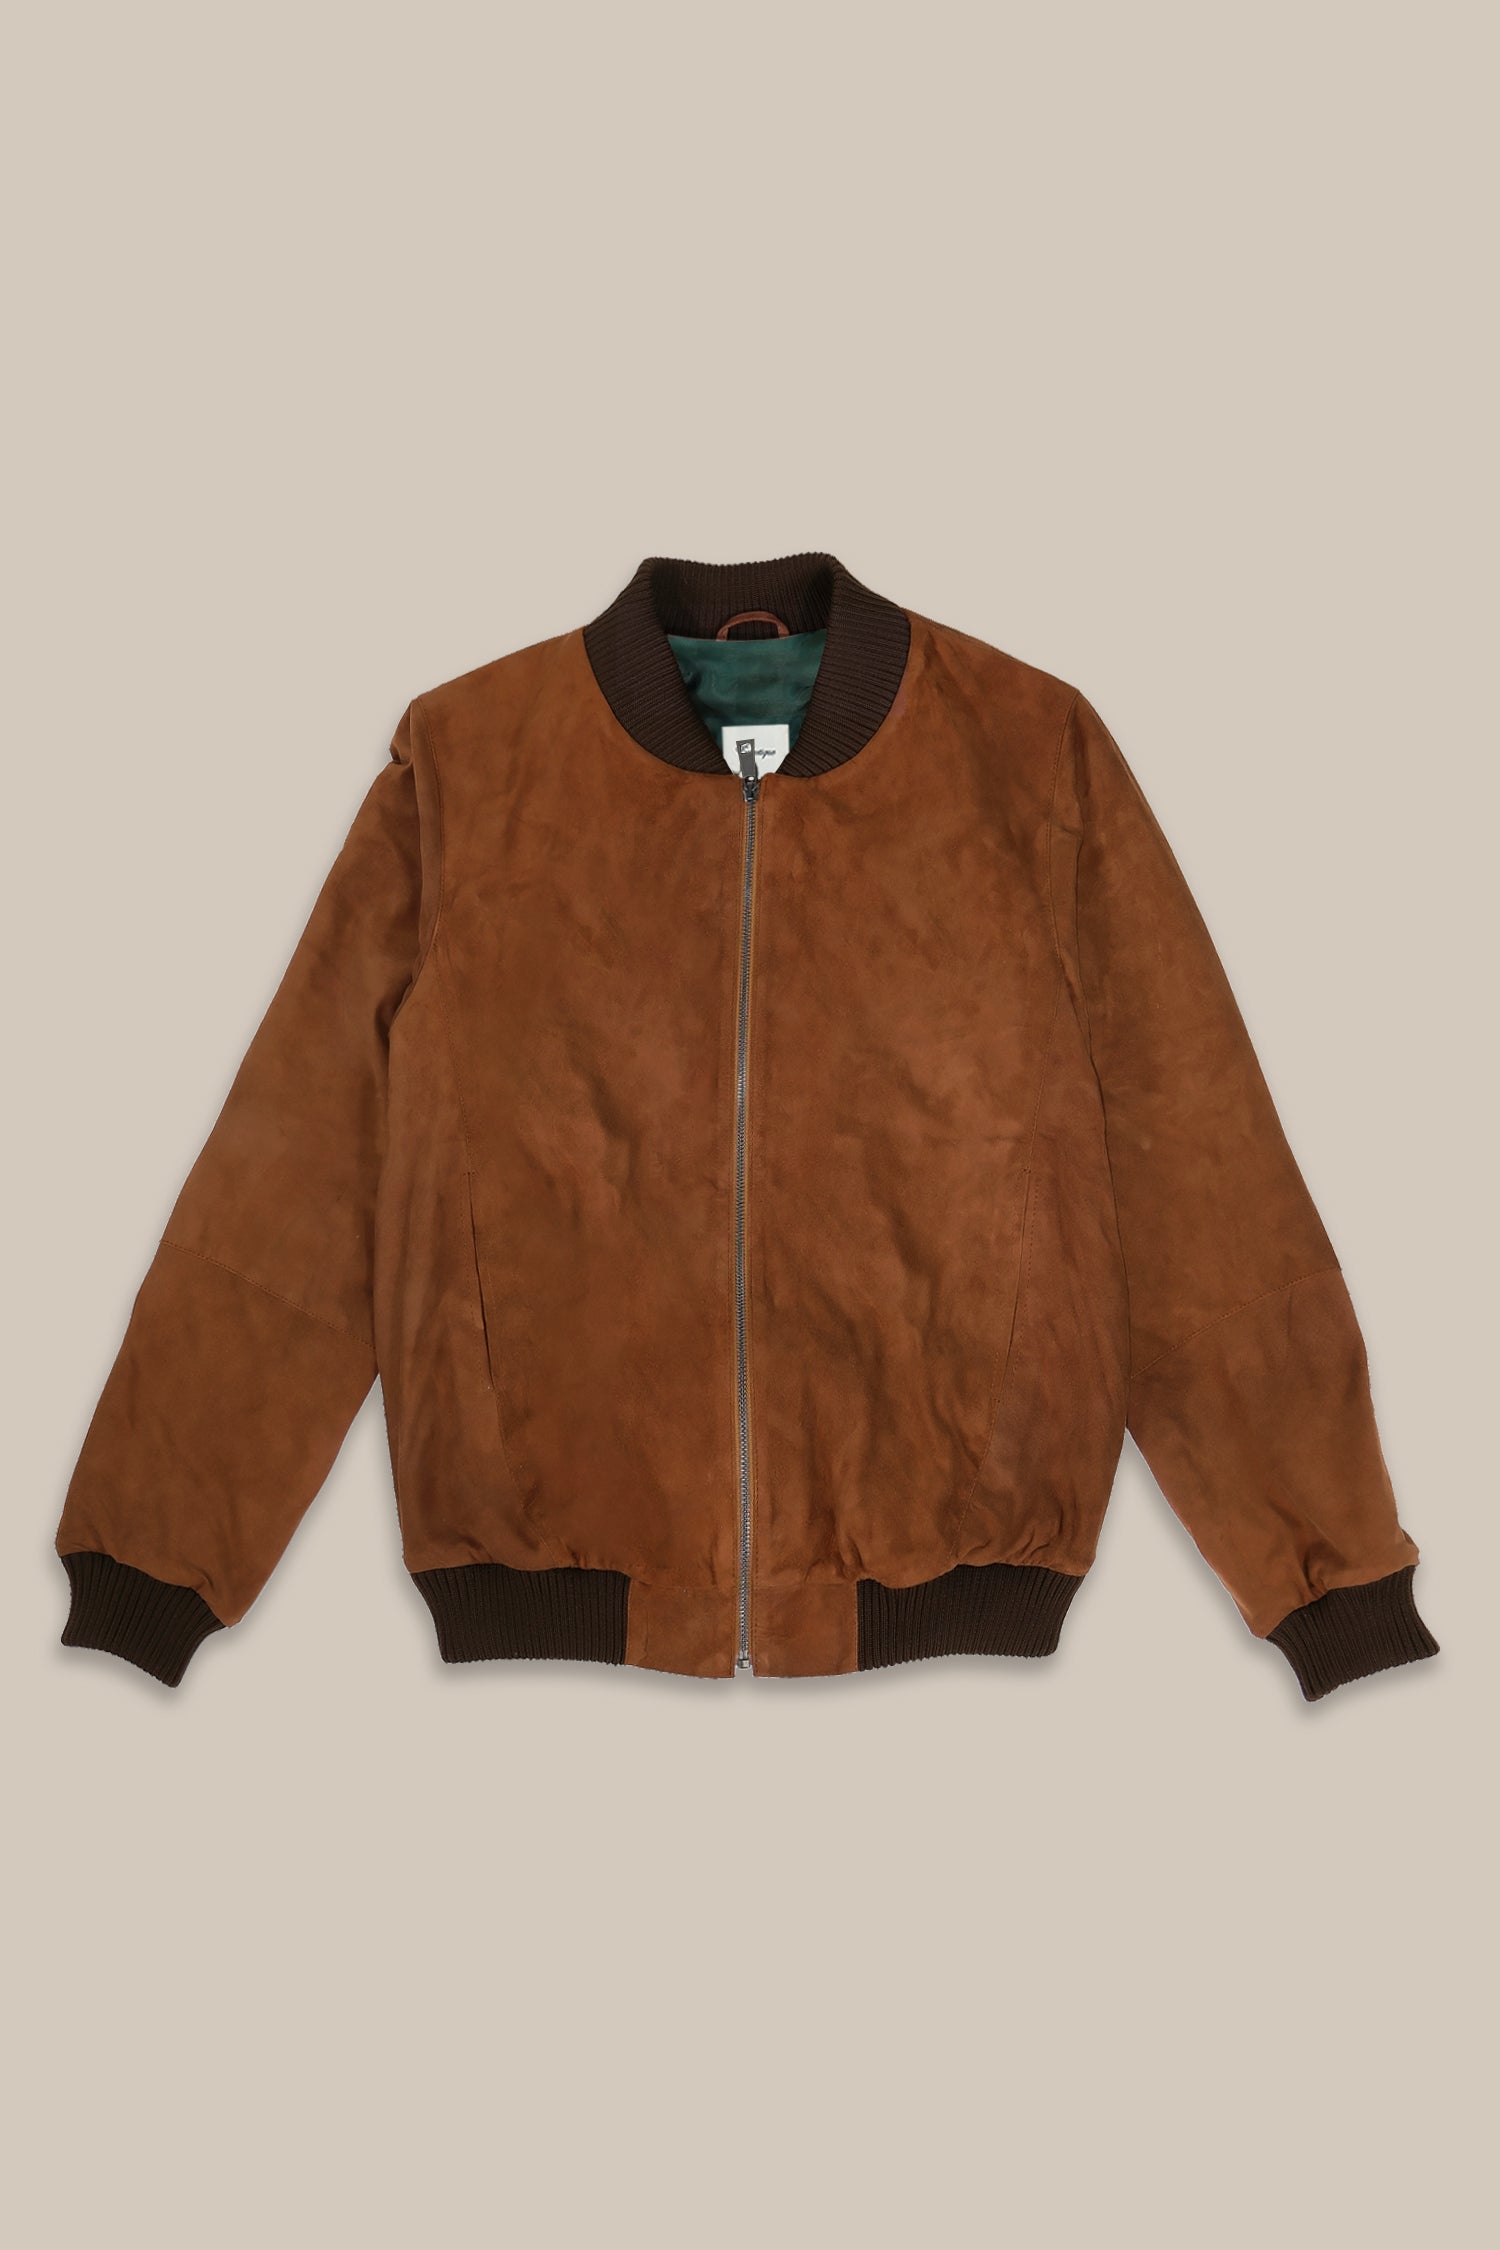 Éclectique Tobia's Suede Oversized Leather Bomber Jacket